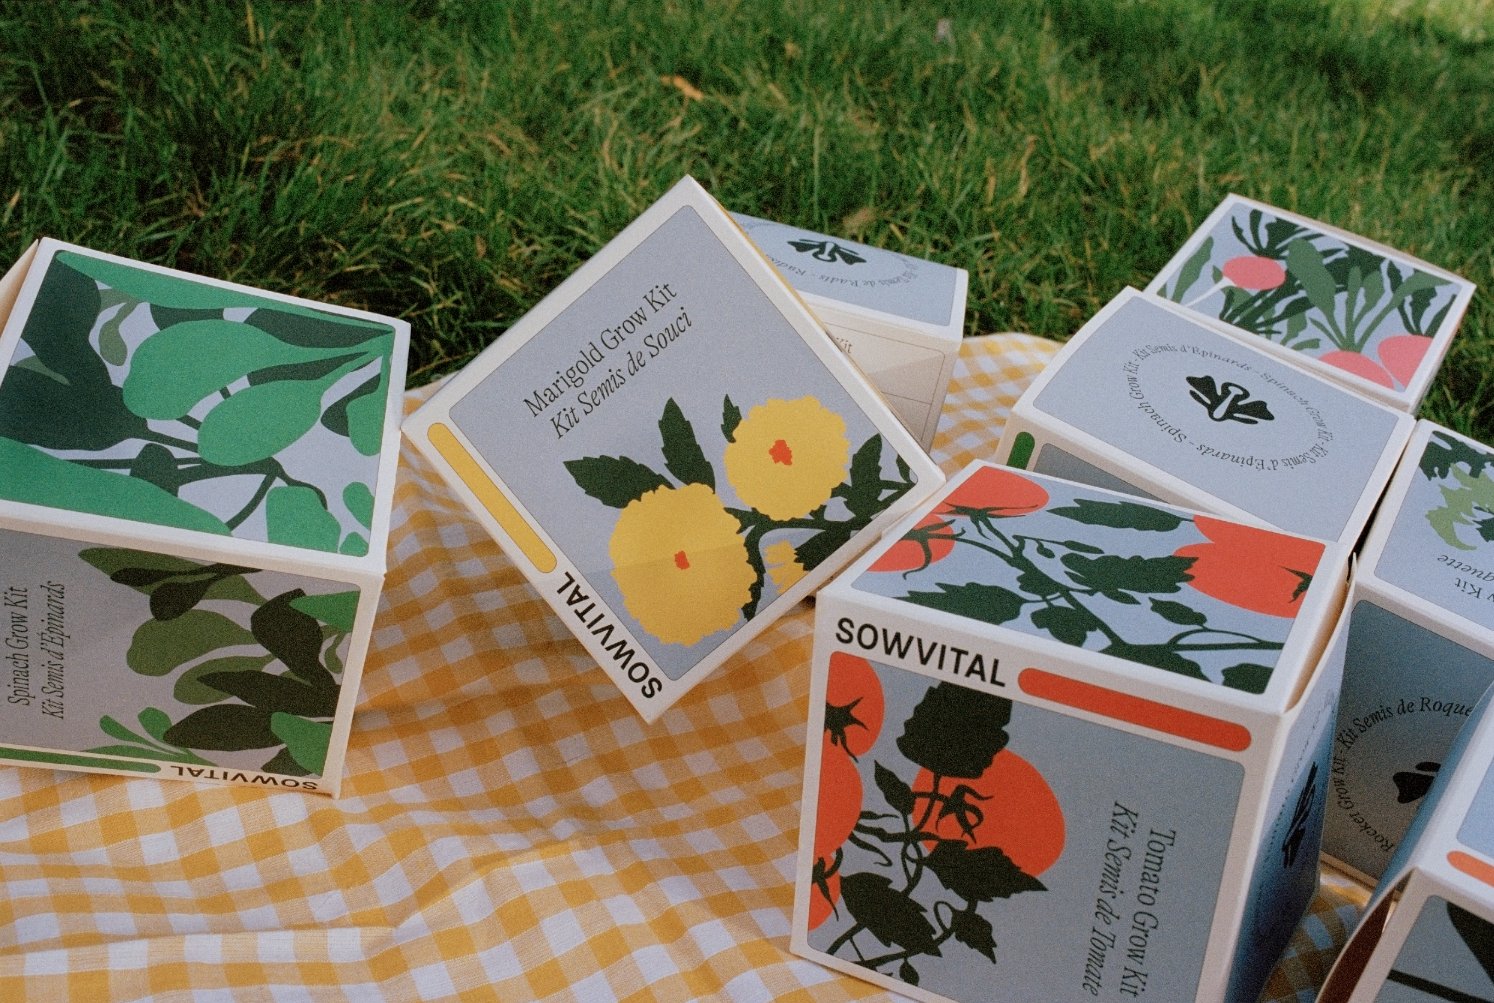 Sowvital’s Fedrigoni Packaging Makes Gardening Look More Chic Than Ever